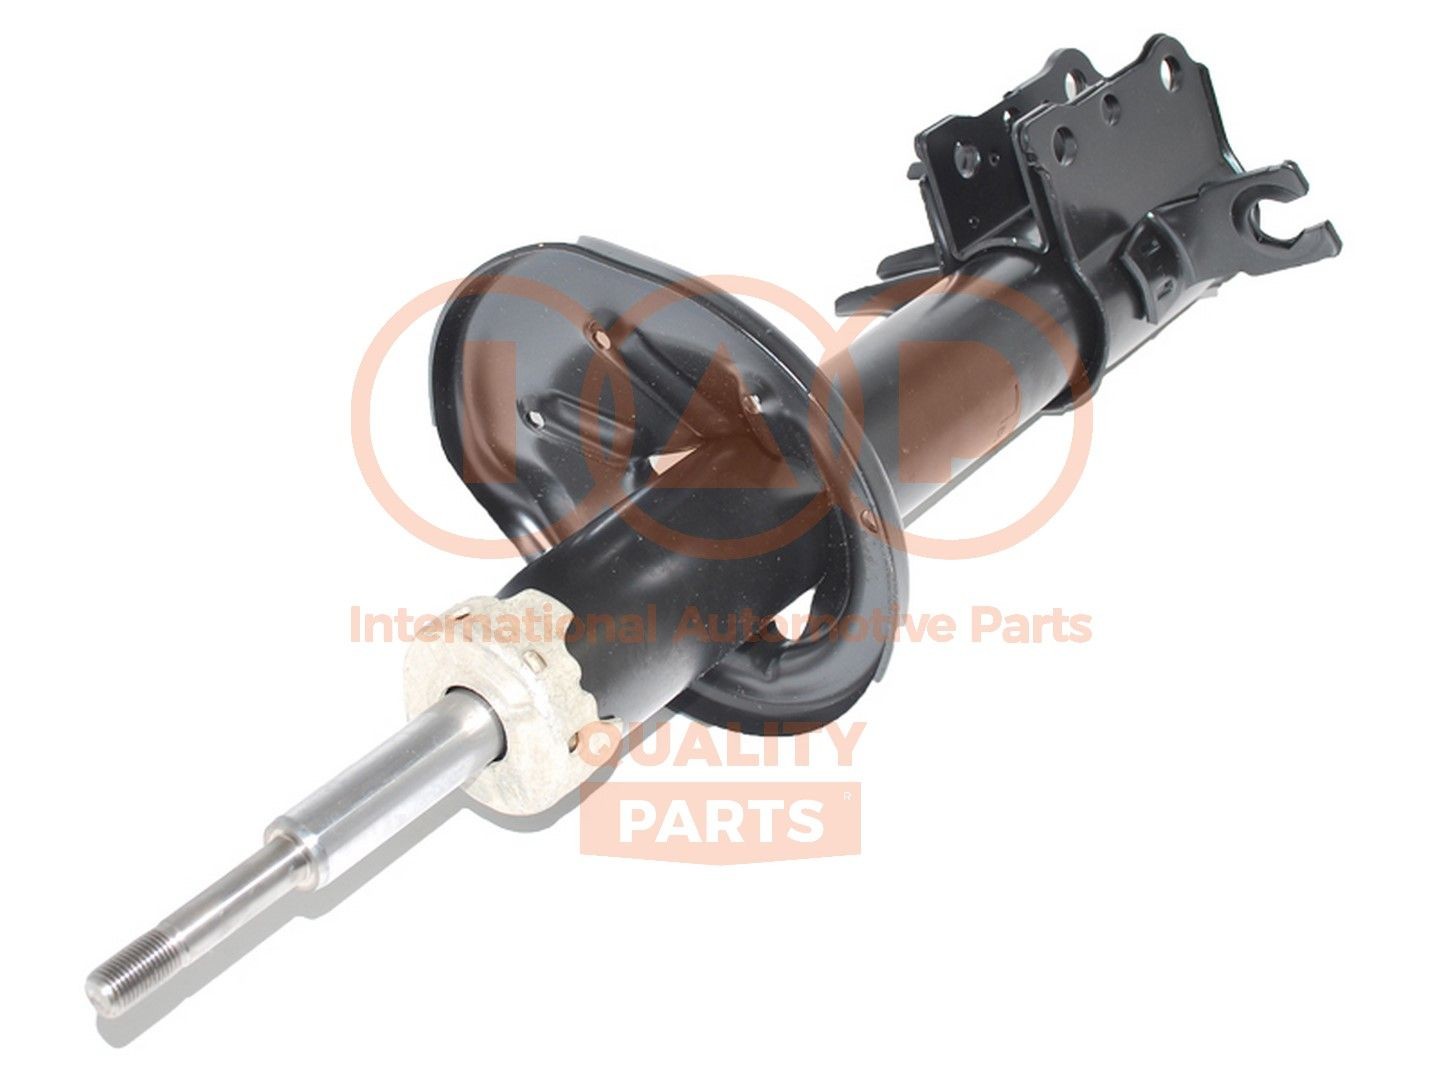 IAP QUALITY PARTS 504-11027A Shock absorber BC1G28900B